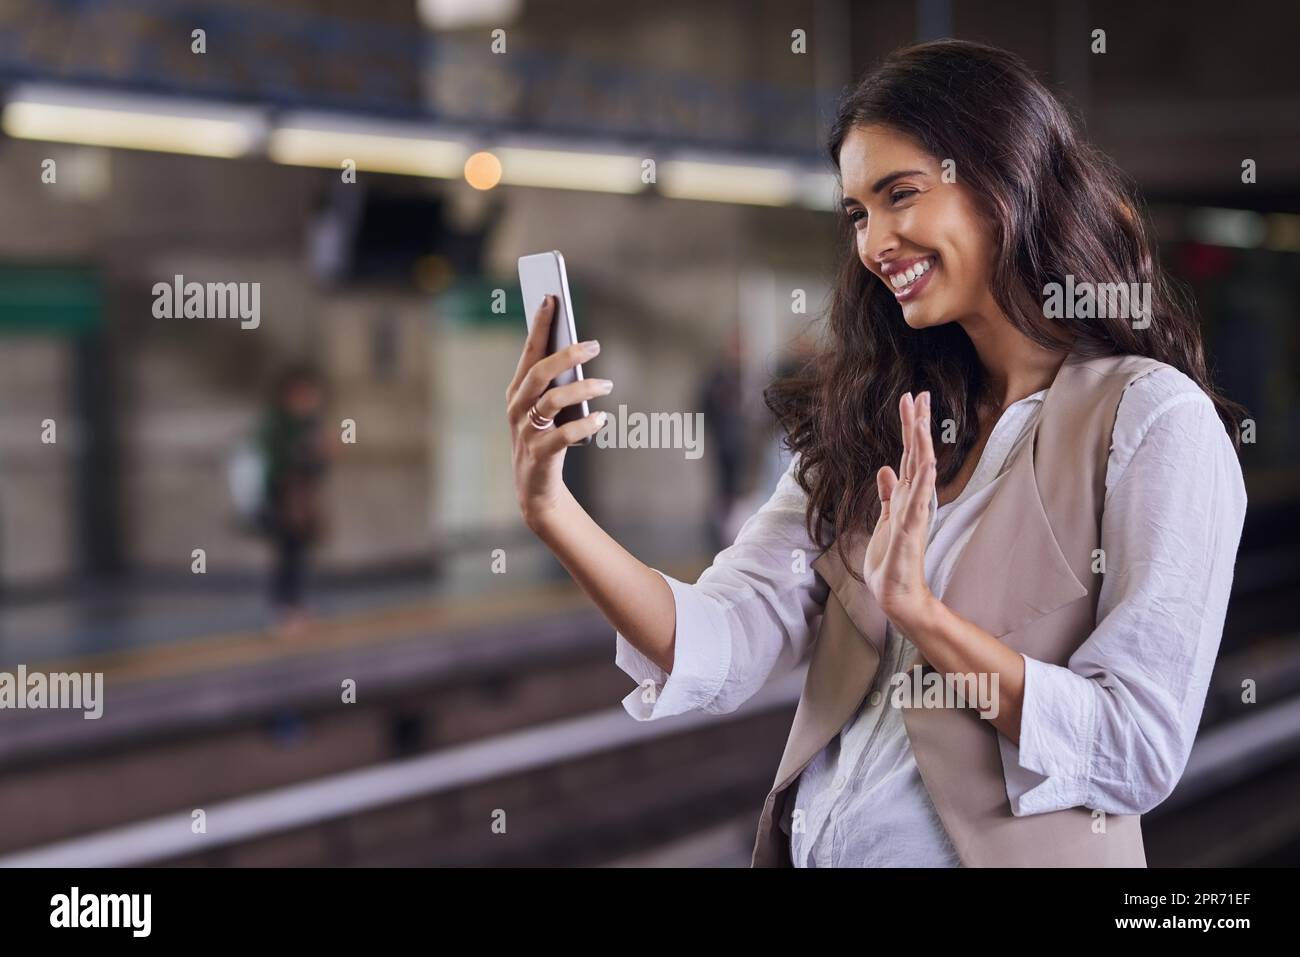 Saying hello to the people at home. Cropped shot of a young attractive woman video calling with her cellphone while commuting with the train. Stock Photo